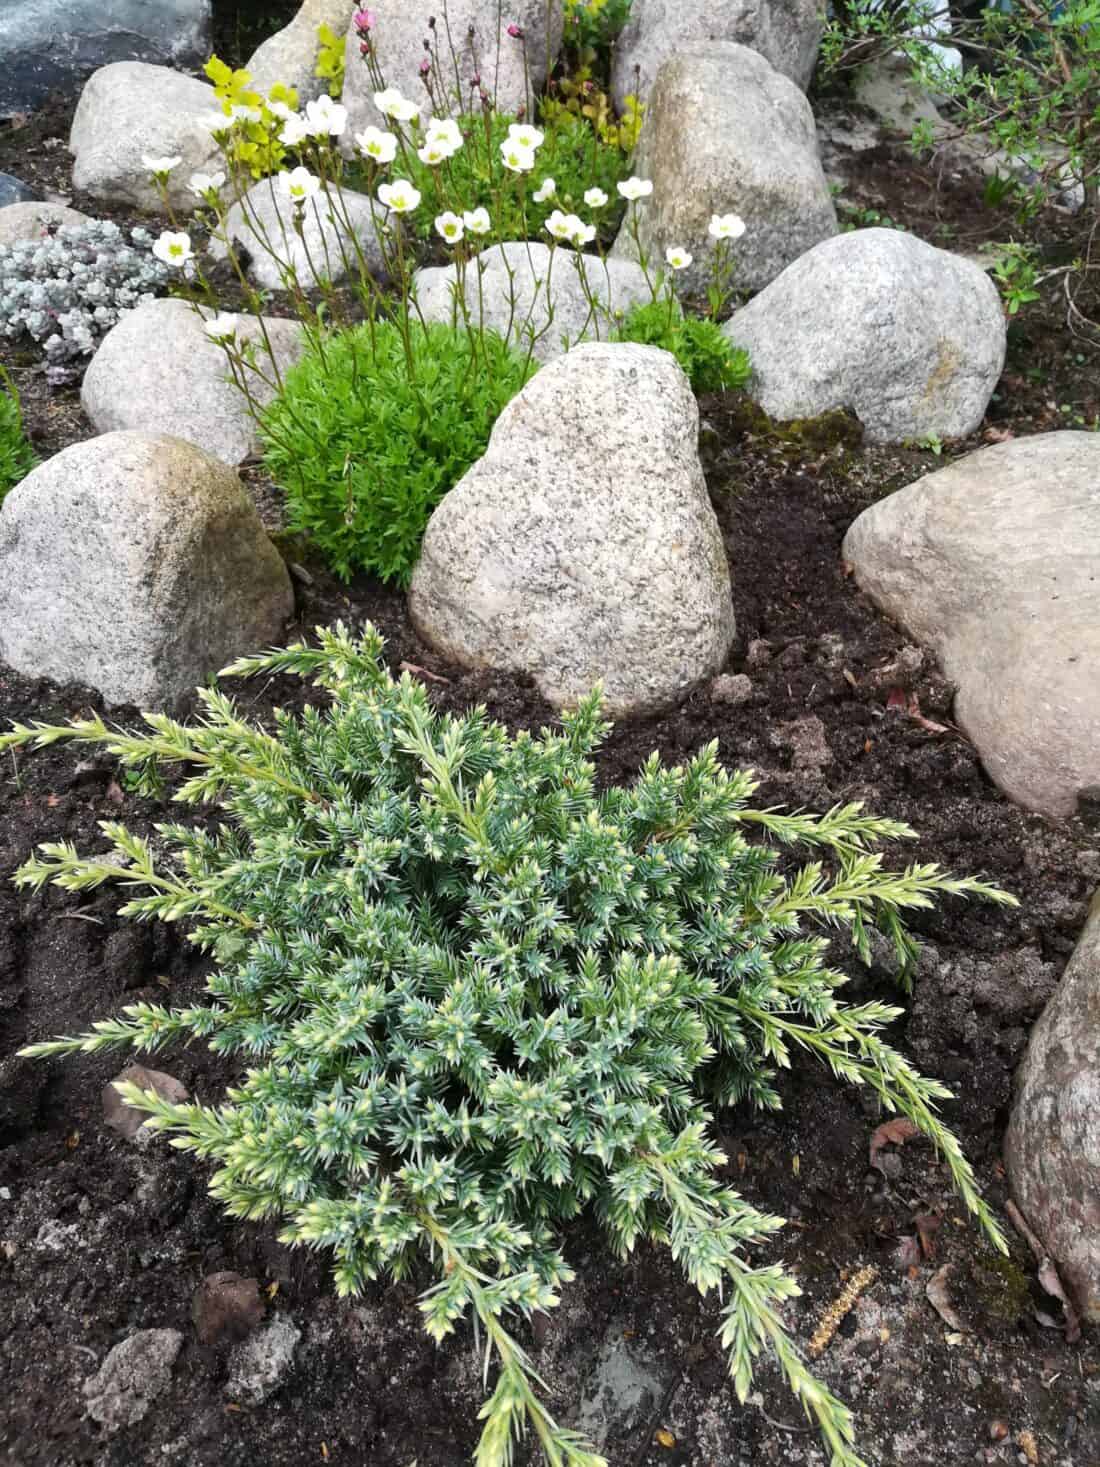 An evergreen plant is thriving in a bed of rocks.